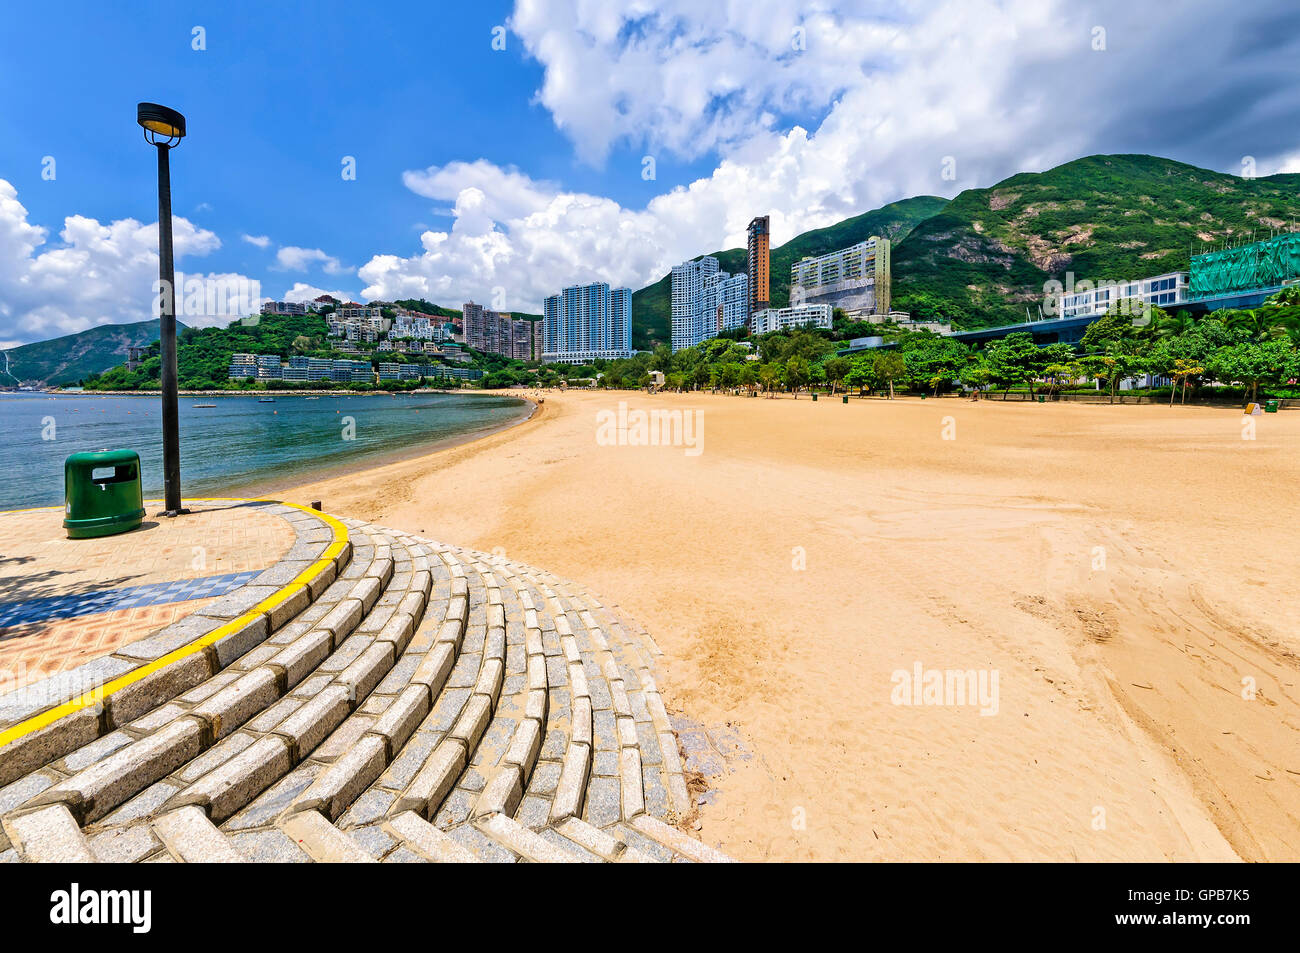 View of Repulse Bay beach in south Hong Kong island, China. The Repulse Bay area is one of the most expensive housing areas. Stock Photo